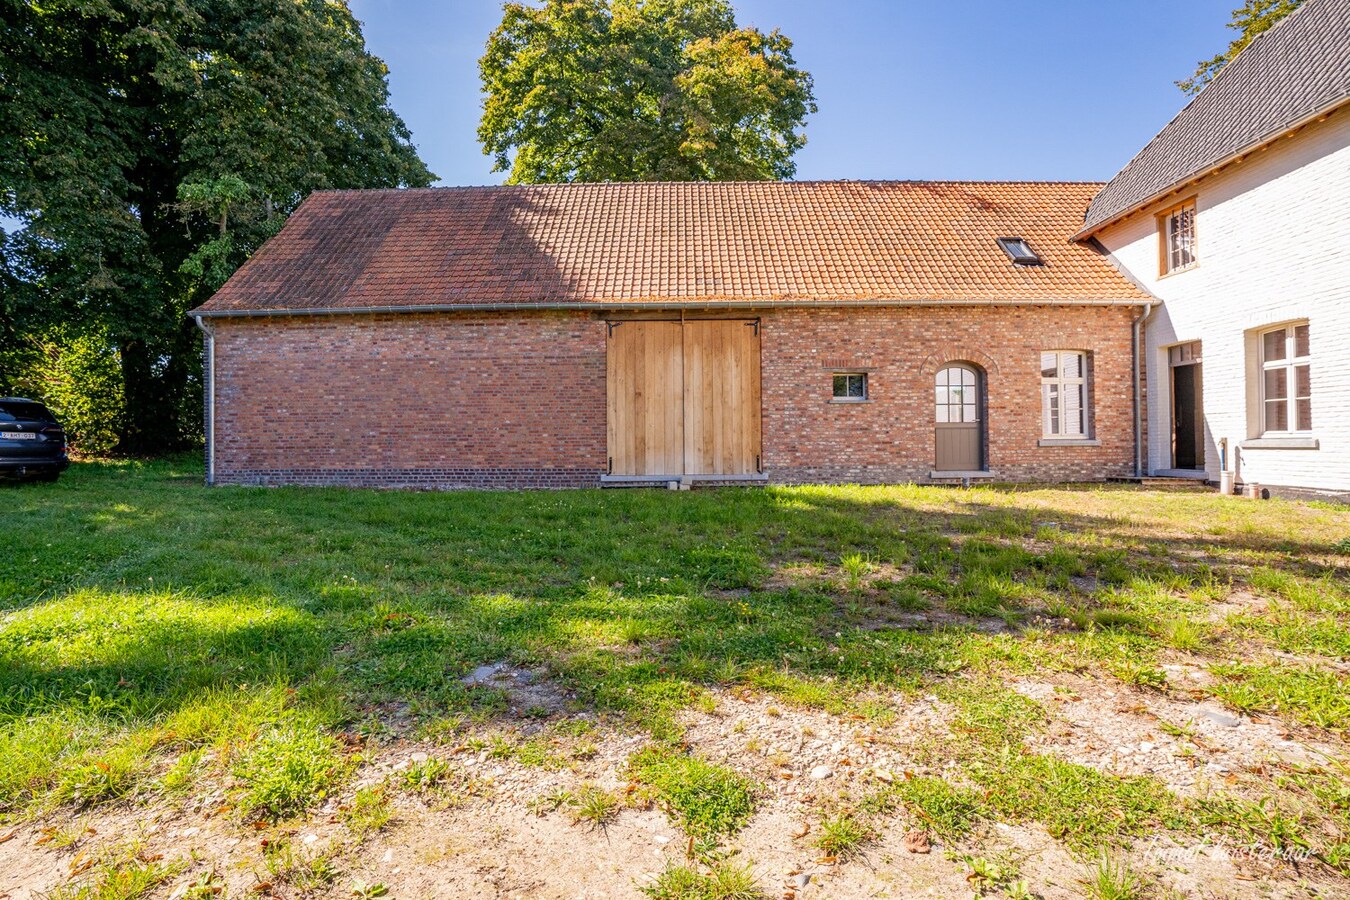 Unique farmhouse in an exceptional location on approximately 5 hectares in Peer. 